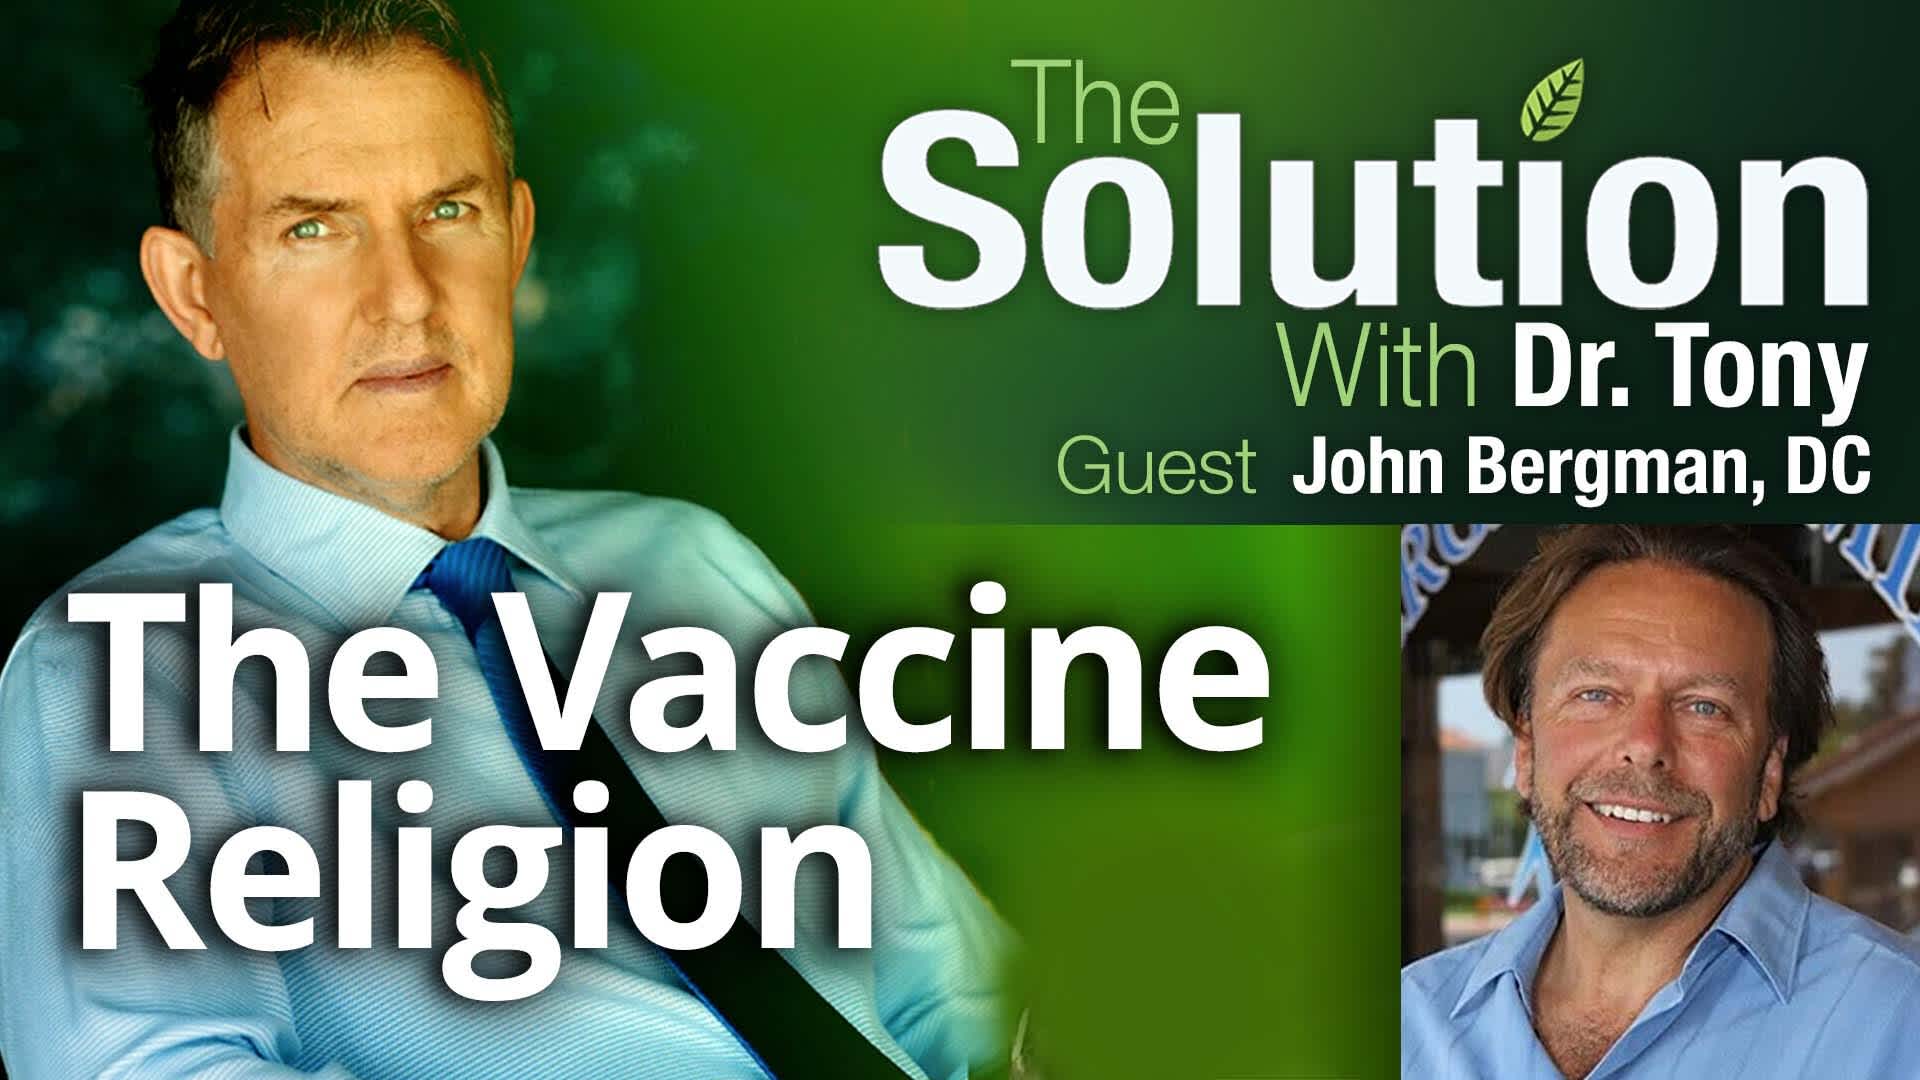 The Vaccine Religion With Guest John Bergman, DC